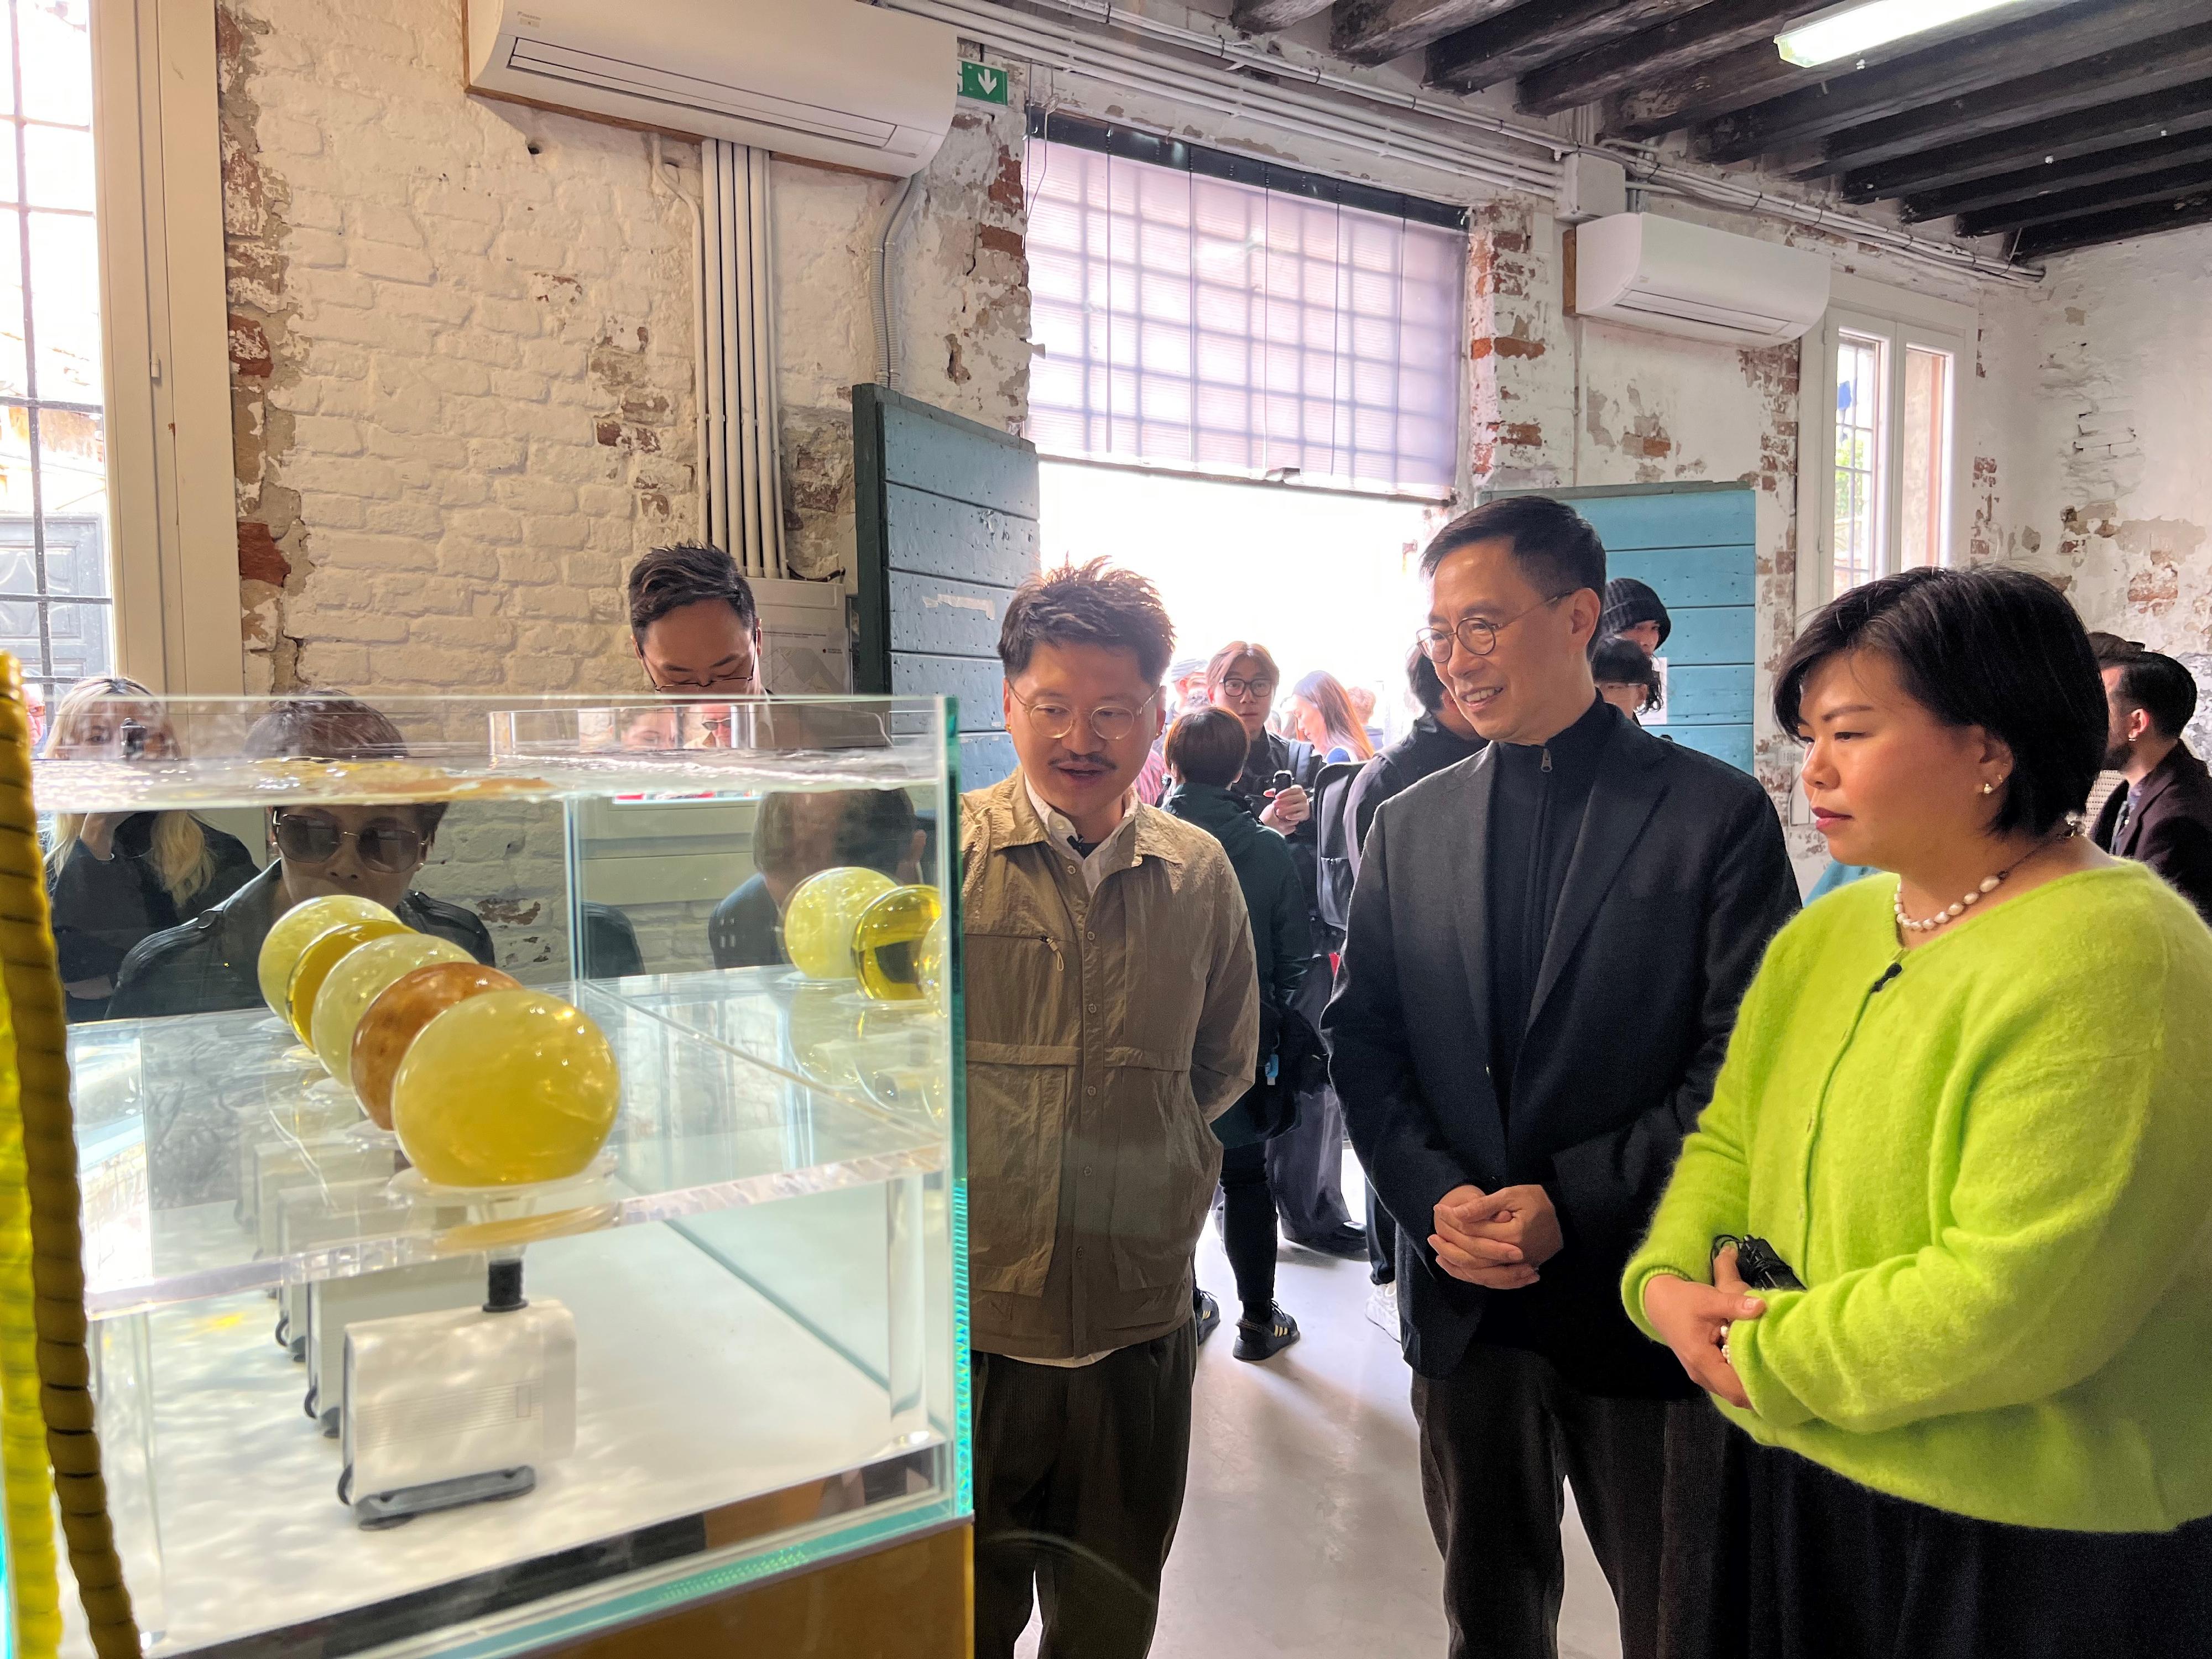 The Secretary for Culture, Sports and Tourism, Mr Kevin Yeung, visited the Hong Kong exhibition at the Venice Biennale in Venice, Italy, yesterday (April 19, Venice time). Photo shows Hong Kong artist Trevor Yeung’s (left) introducing his art piece to Mr Yeung (centre).